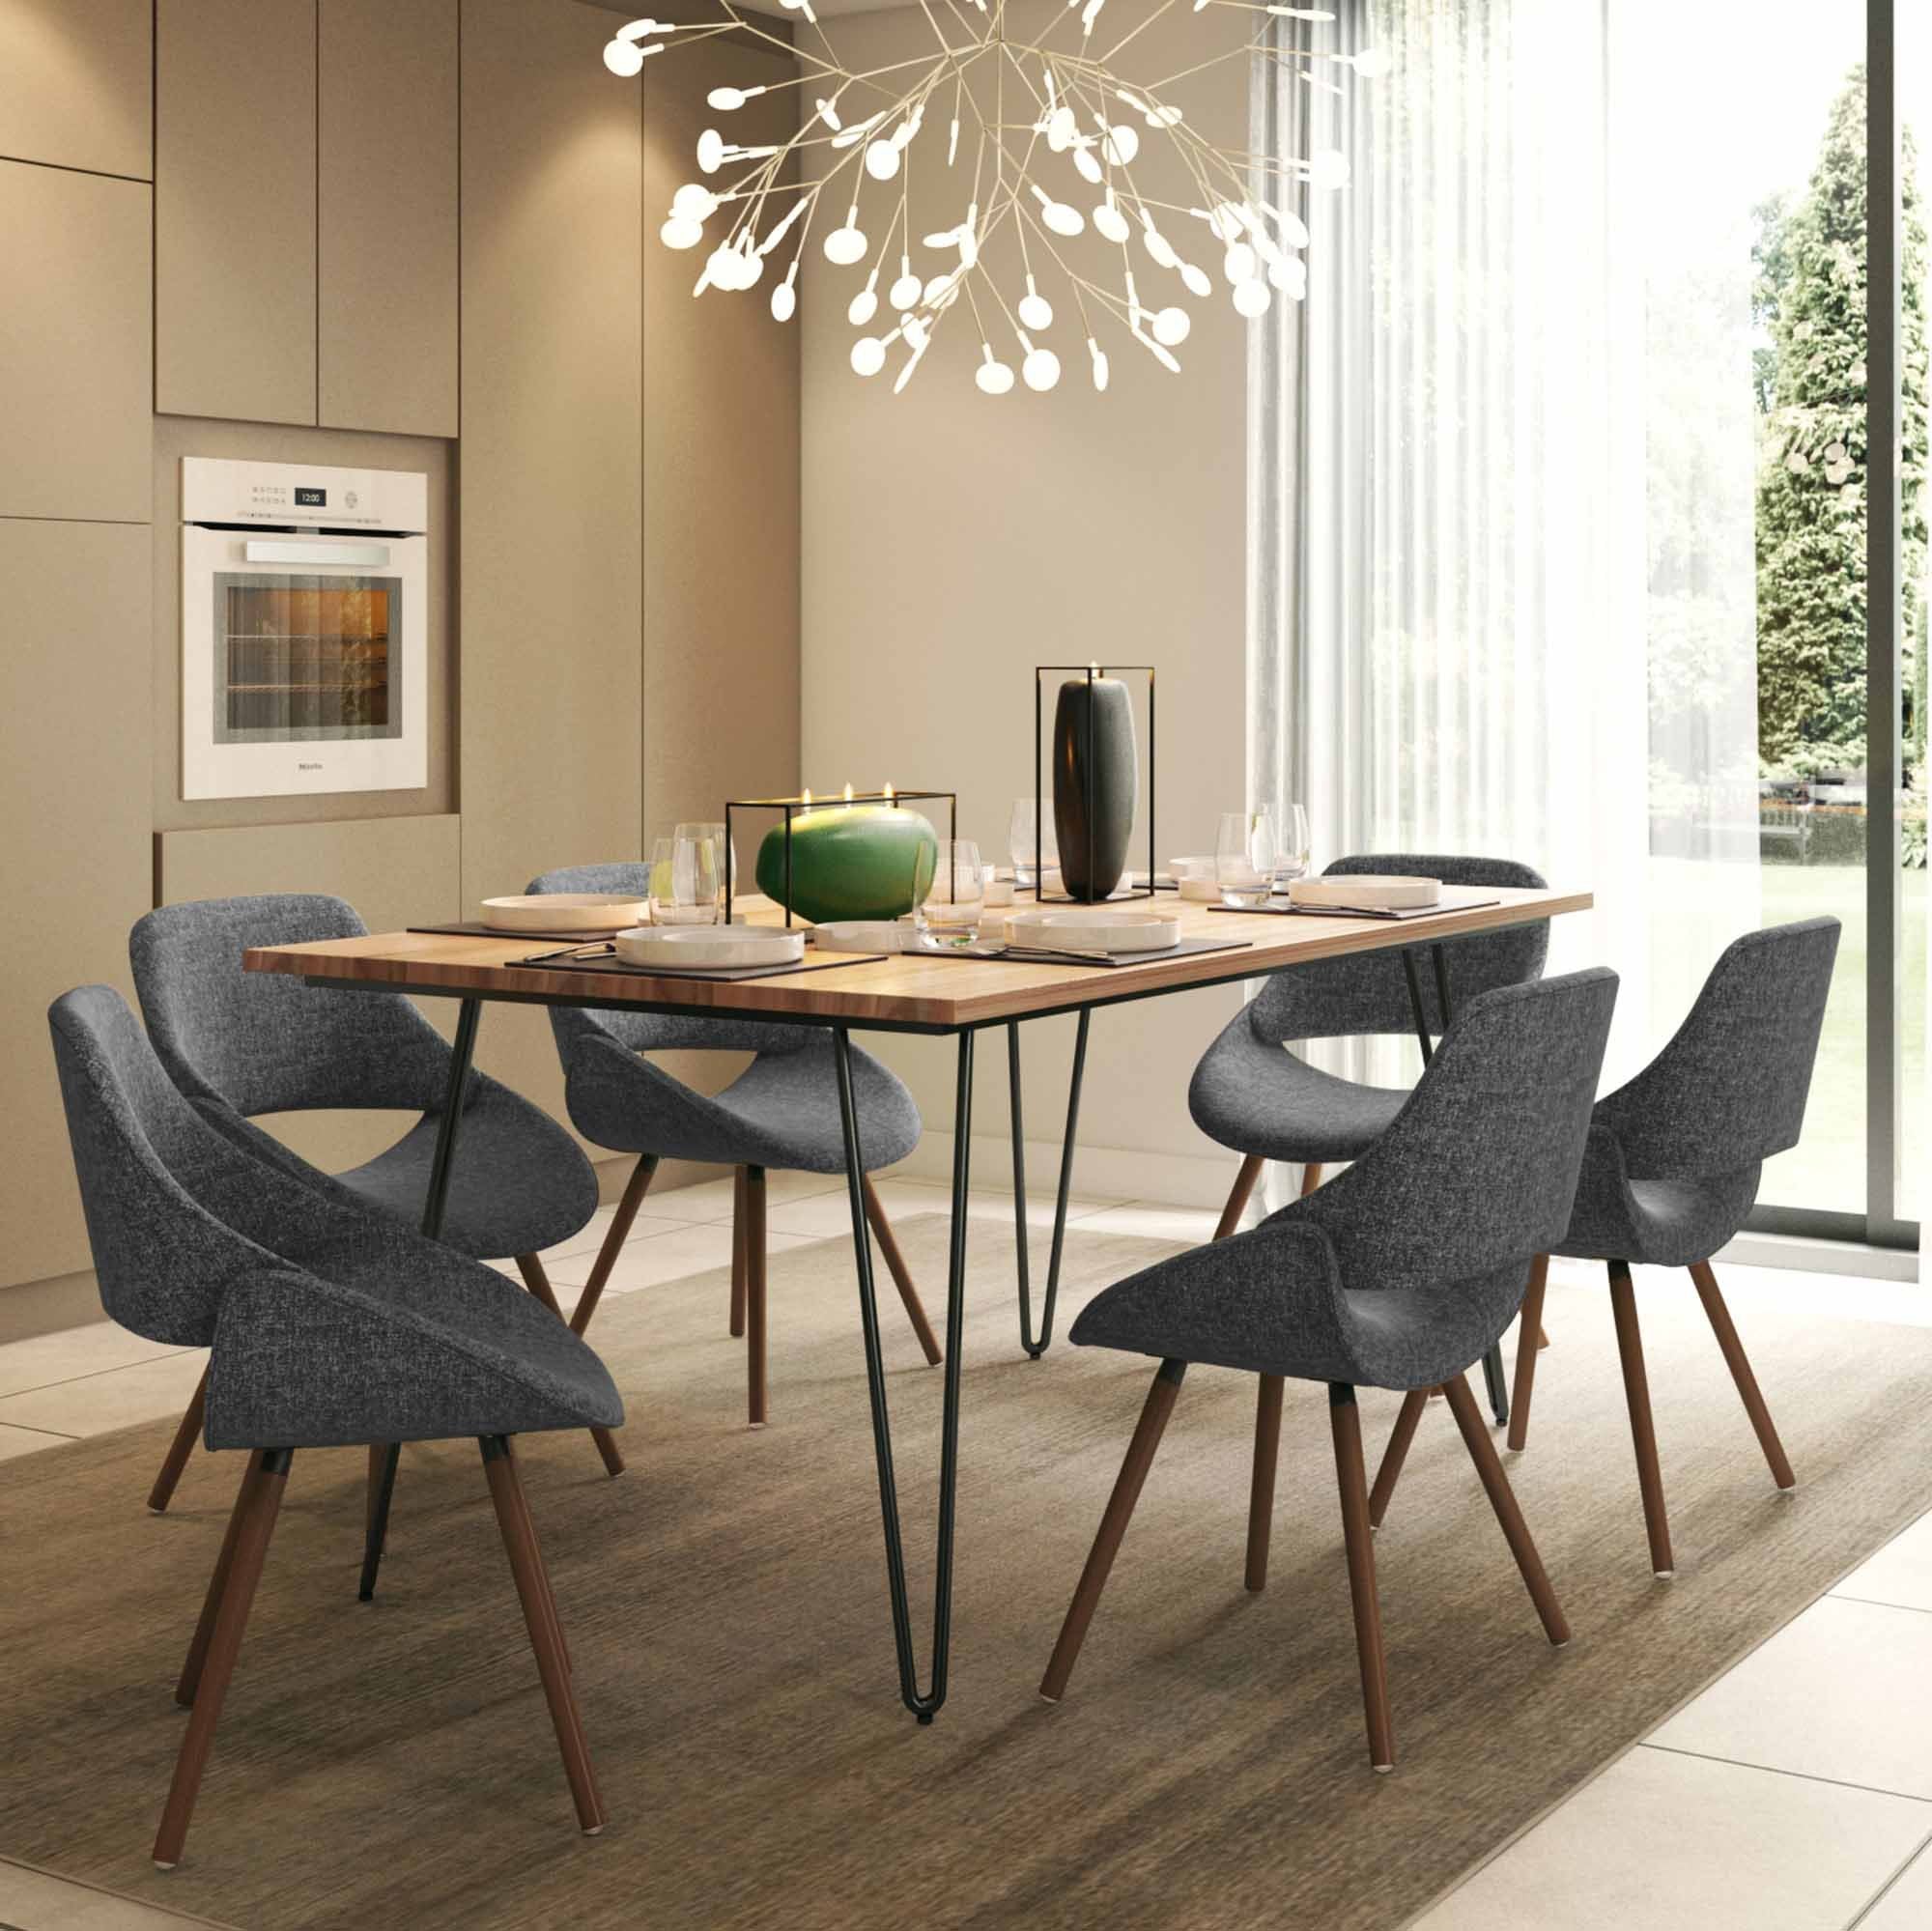 Grey and Natural Woven Fabric | Malden IV 7 Piece Dining Set